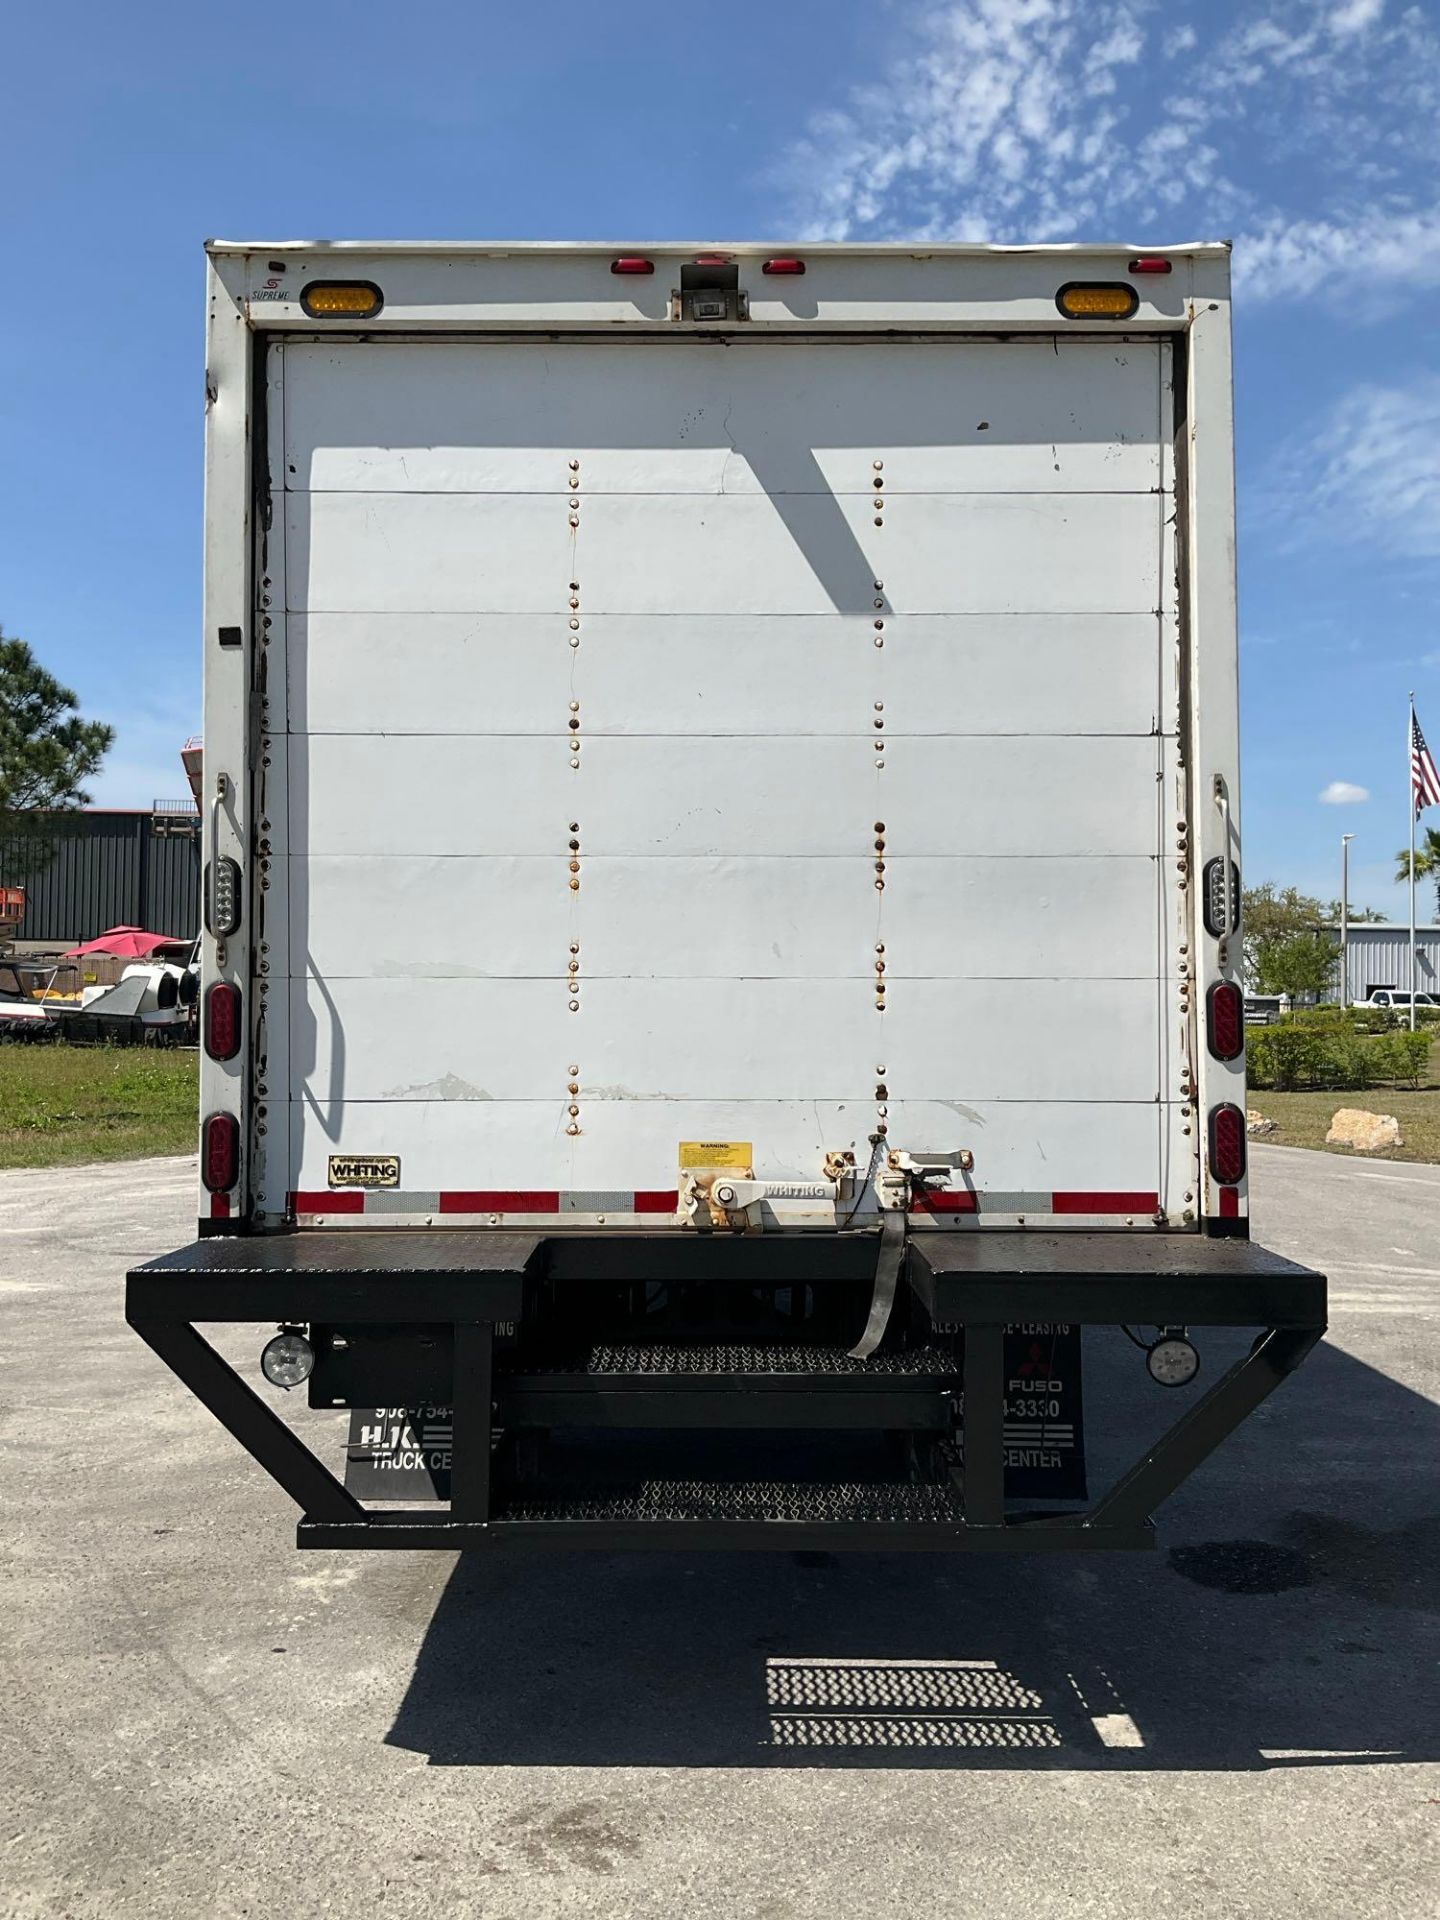 2017 HINO 740 BOX TRUCK , DIESEL , APPROX GVWR 17,950 LBS, BOX BODY APPROX 18FT, ETRACKS, BACK UP... - Image 5 of 29